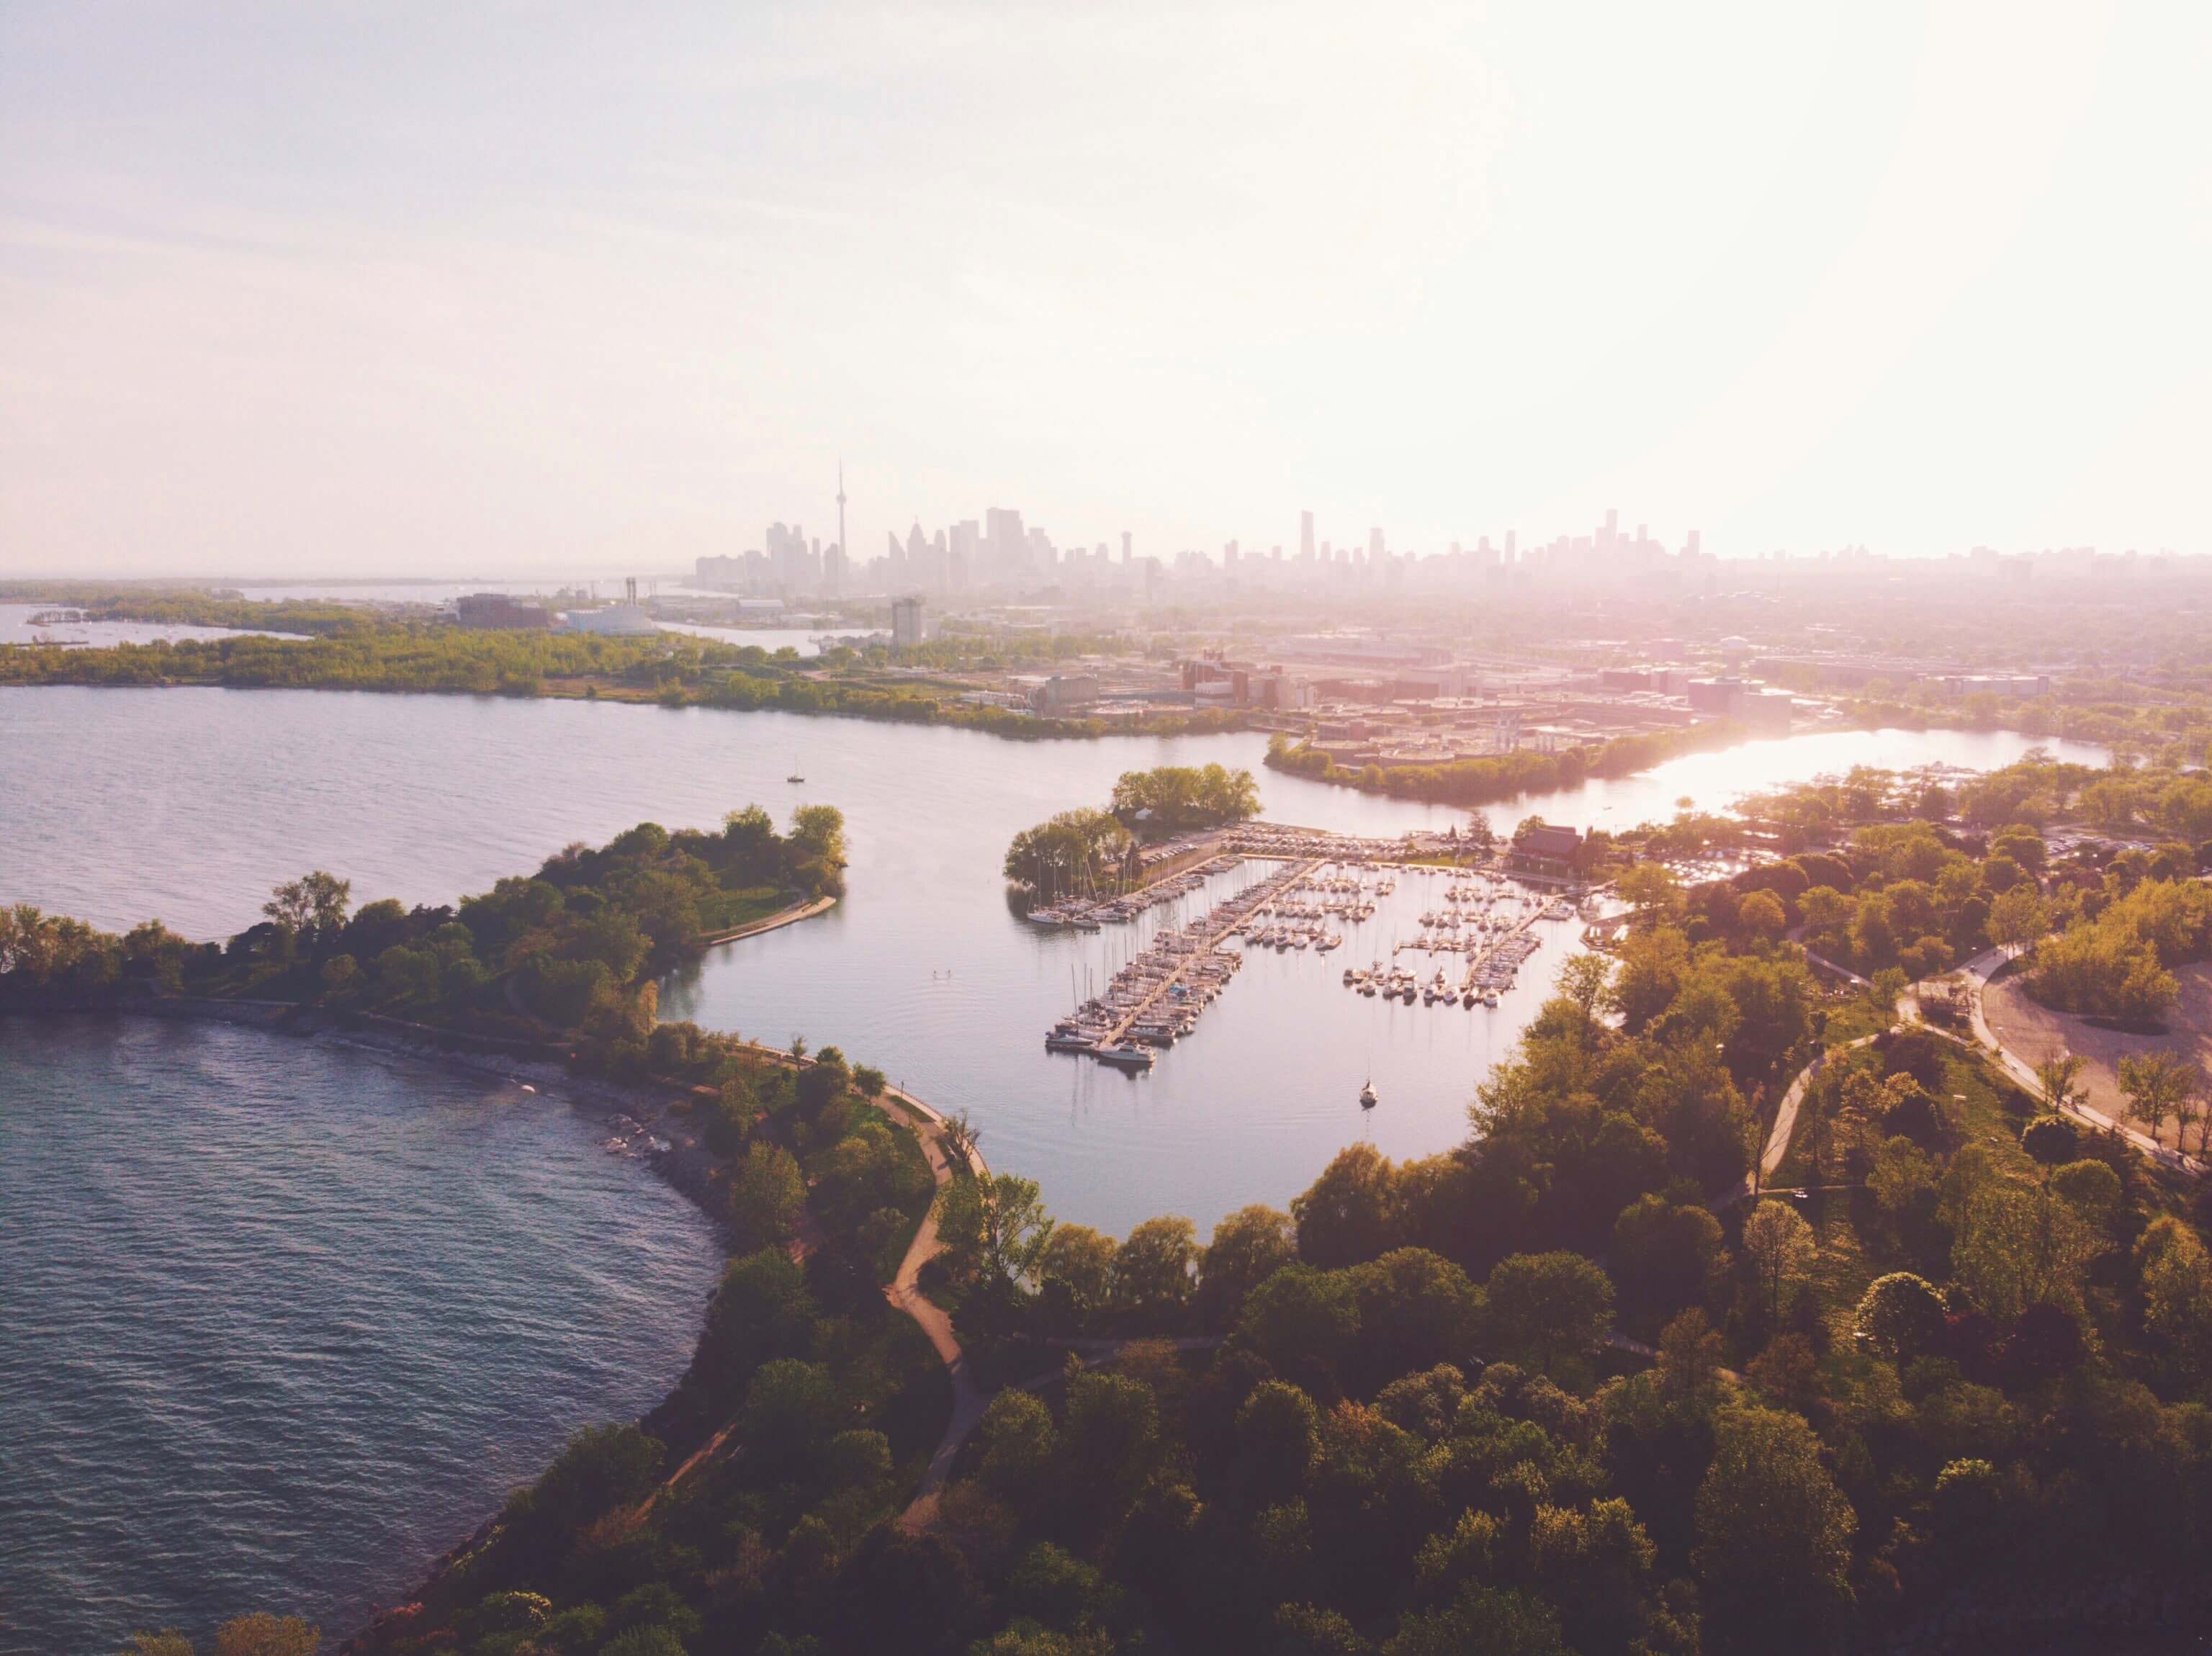 View of Toronto with a lake and green spaces in the foreground by Daniel Novykov